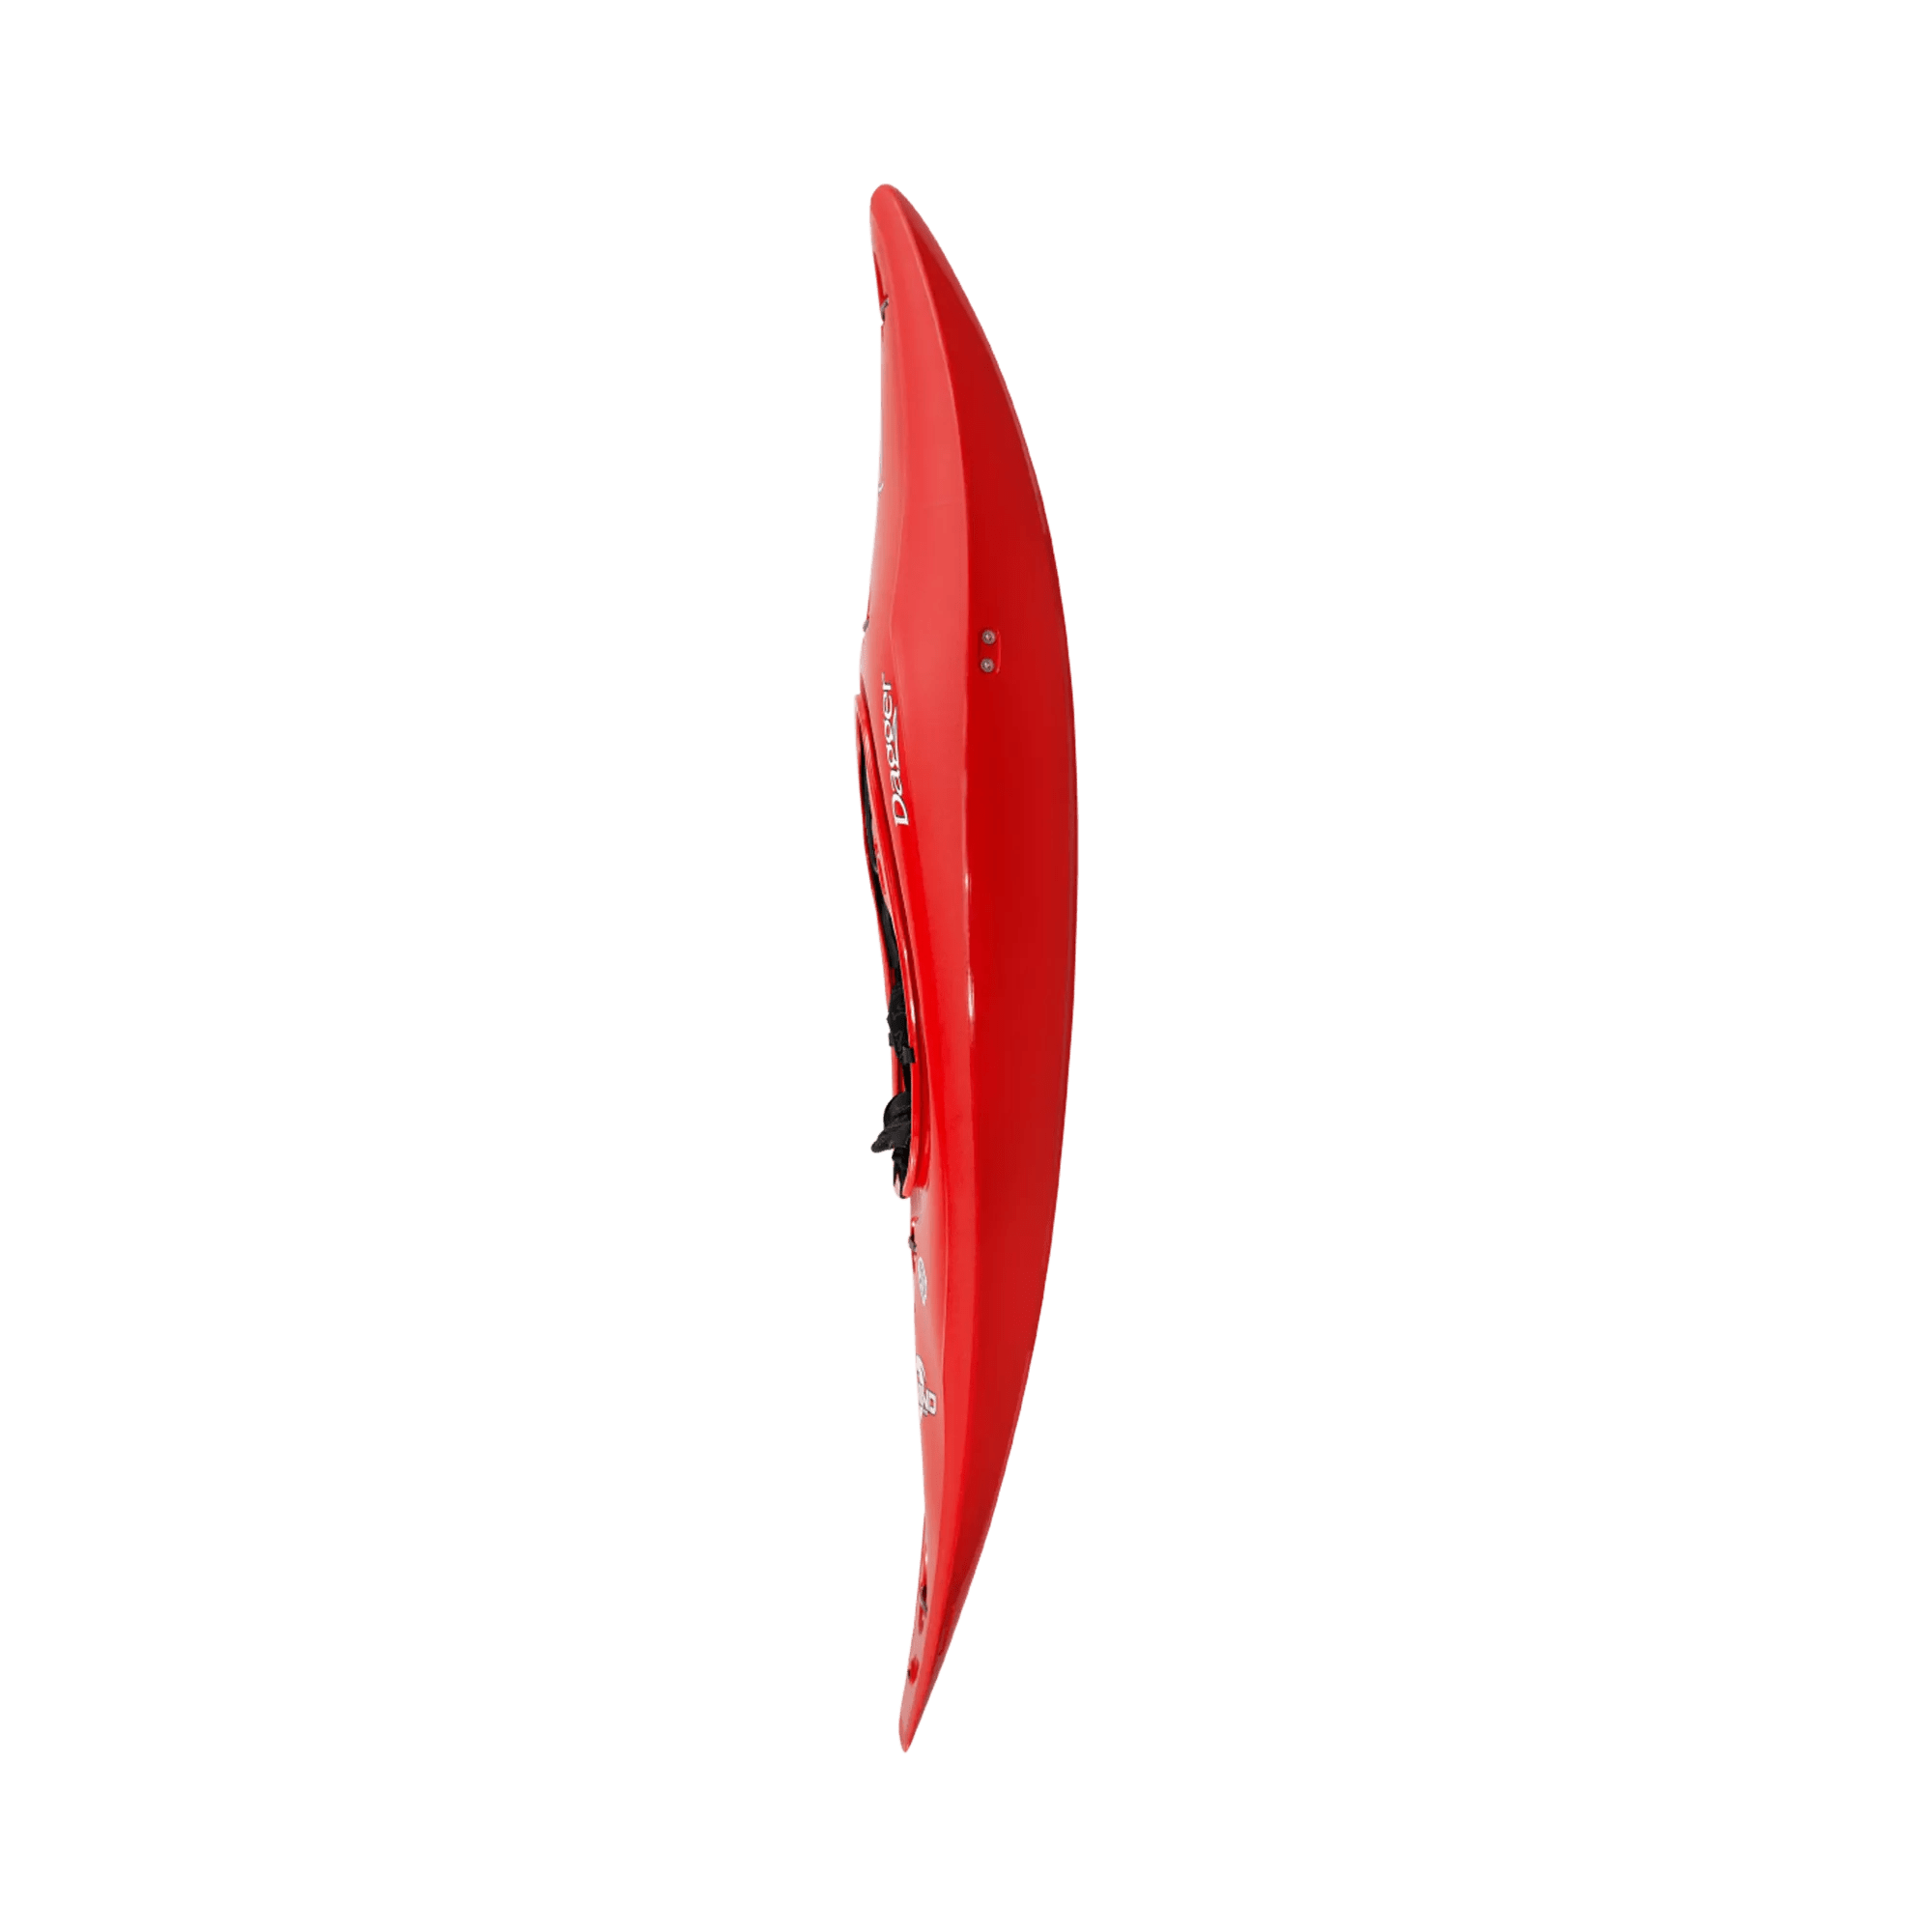 DAGGER - Rewind L River Play Whitewater Kayak - Red - 9010484057 - SIDE